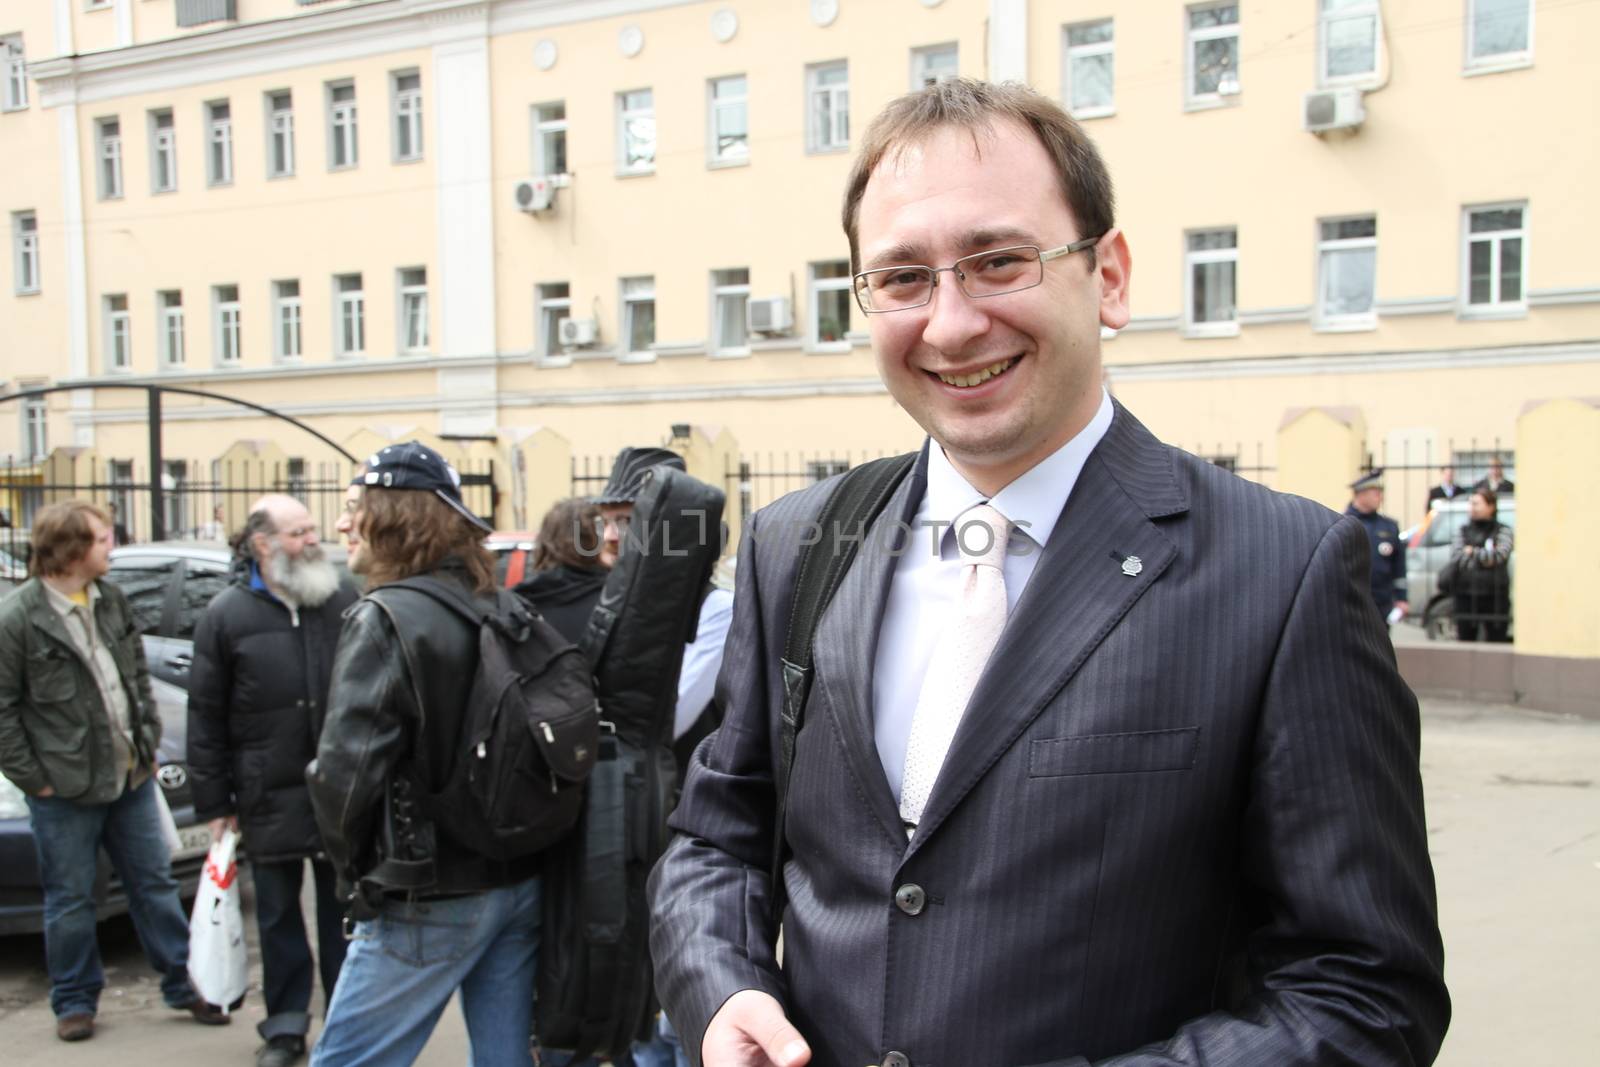 Moscow, Russia - April 19, 2012. The lawyer of the arrested participants of Pussy Riot Nikolay Polozov. . Near the building of the Tagansky court to an unauthorized action there were supporters of the verdict of not guilty for arrested